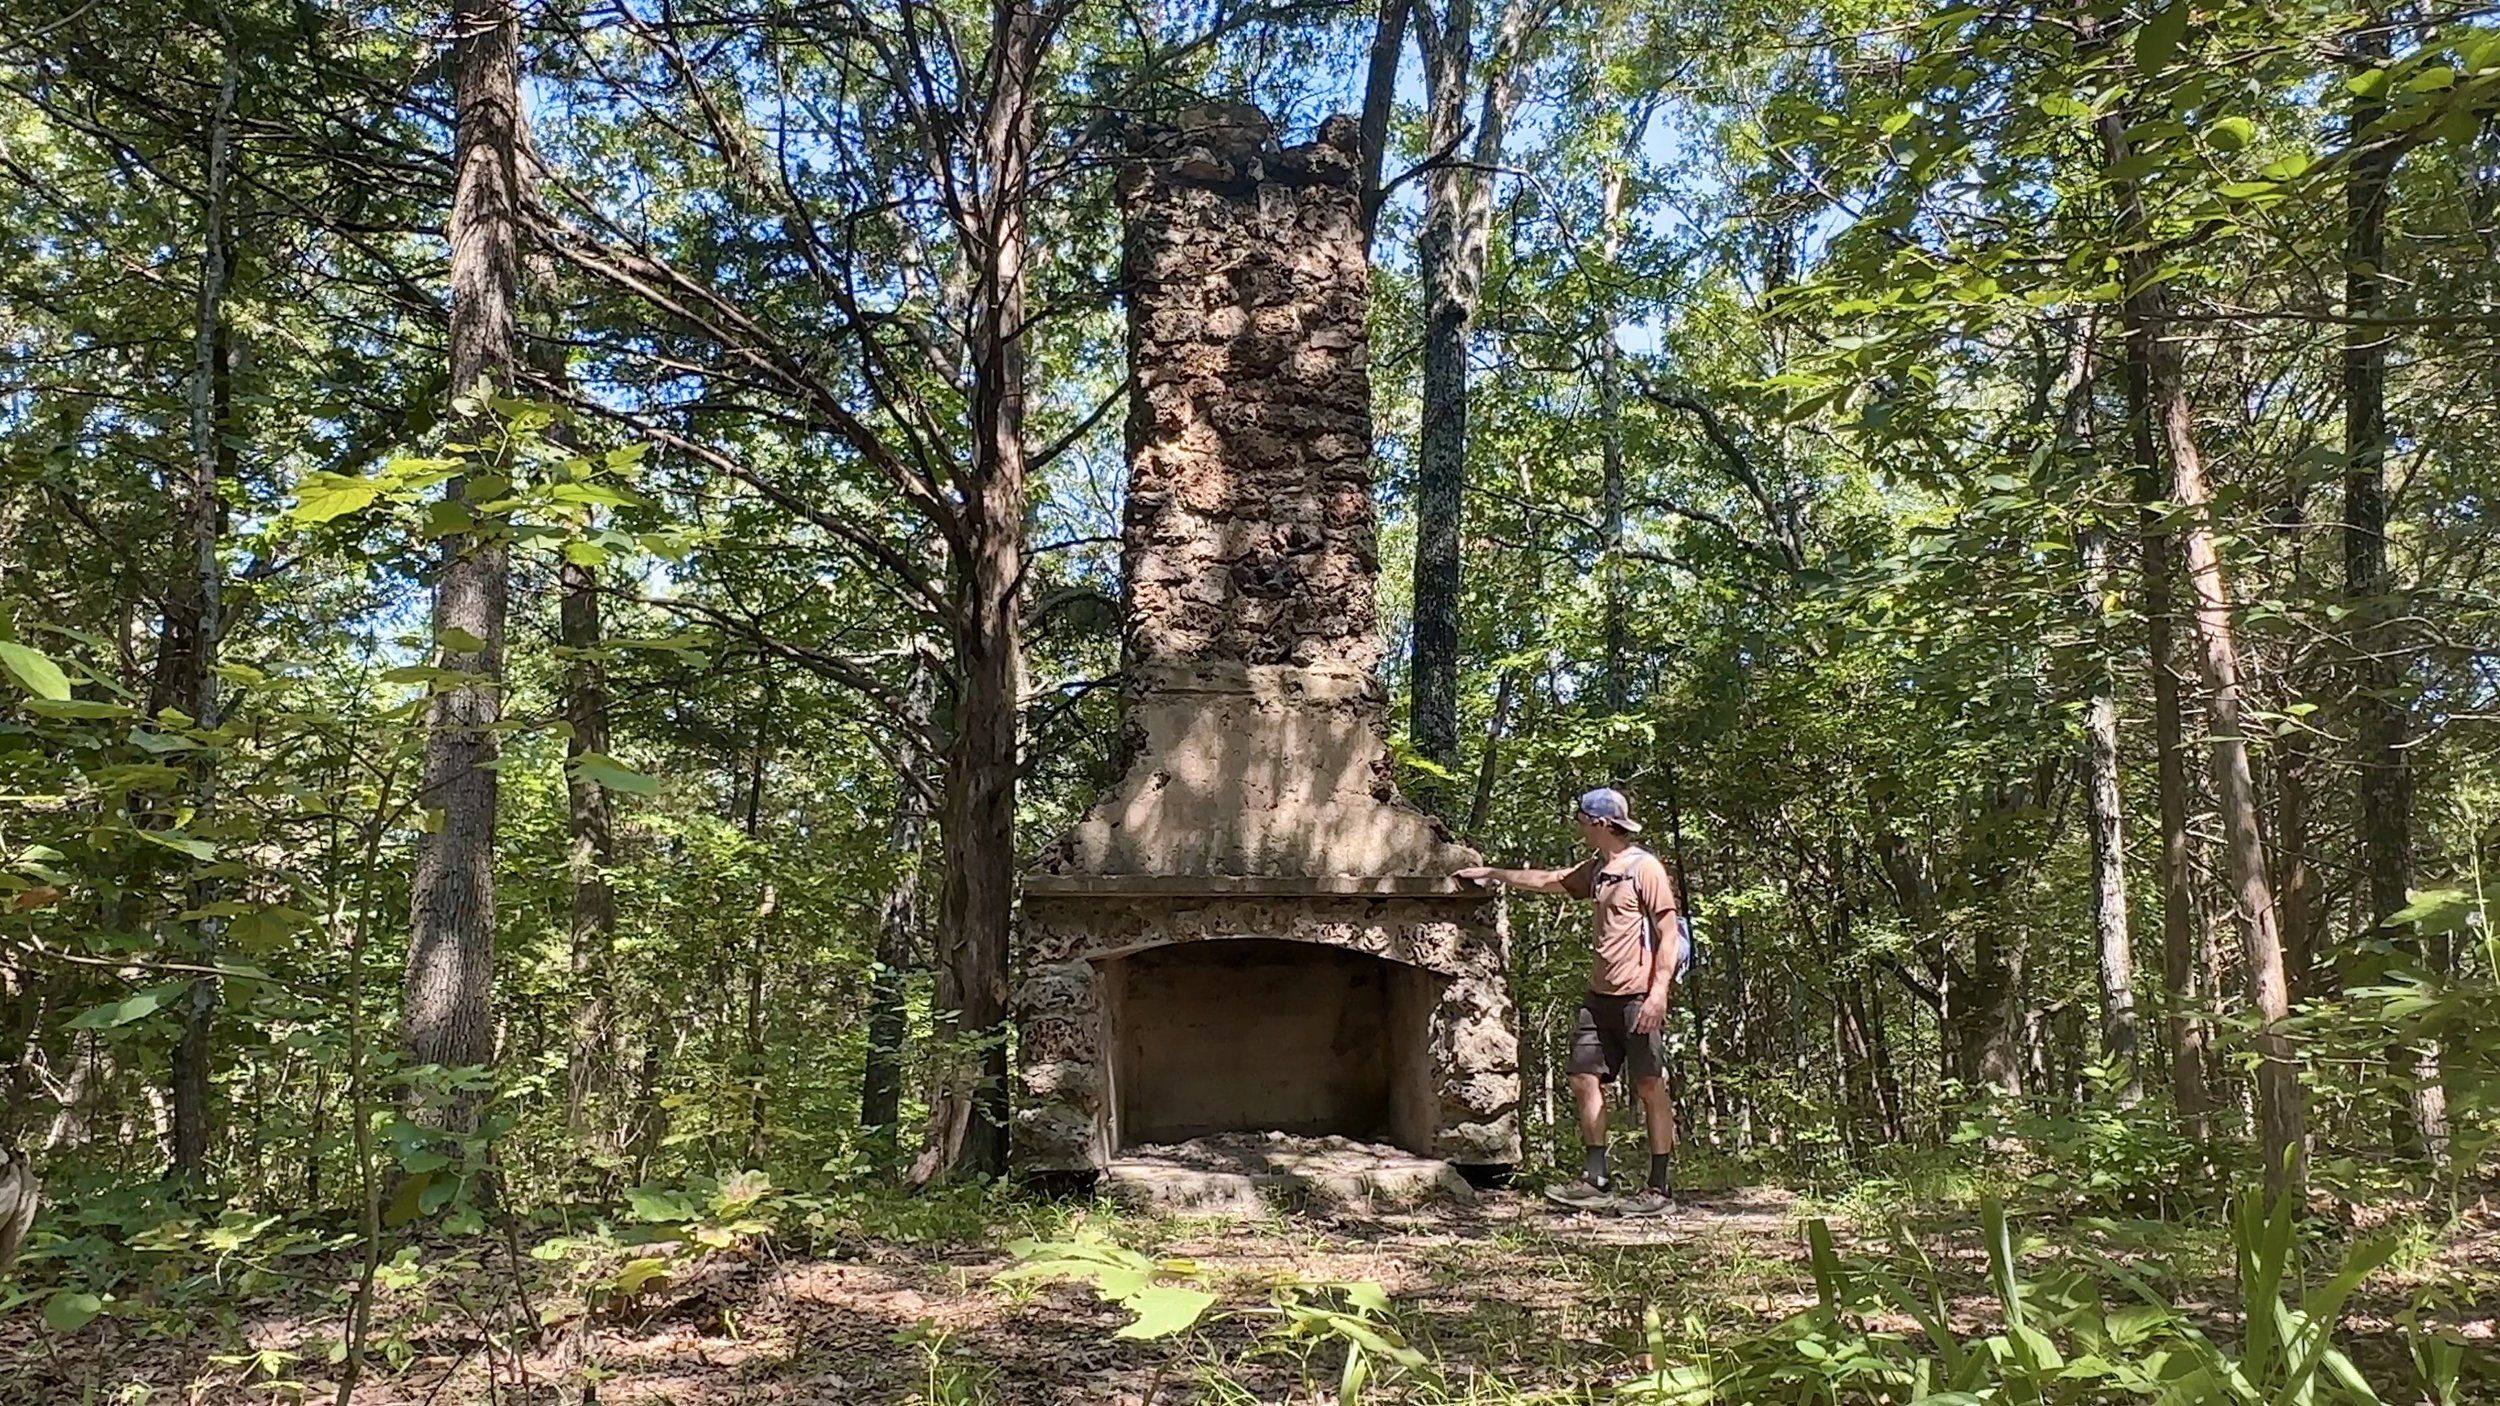 Stone Fireplace Remnants